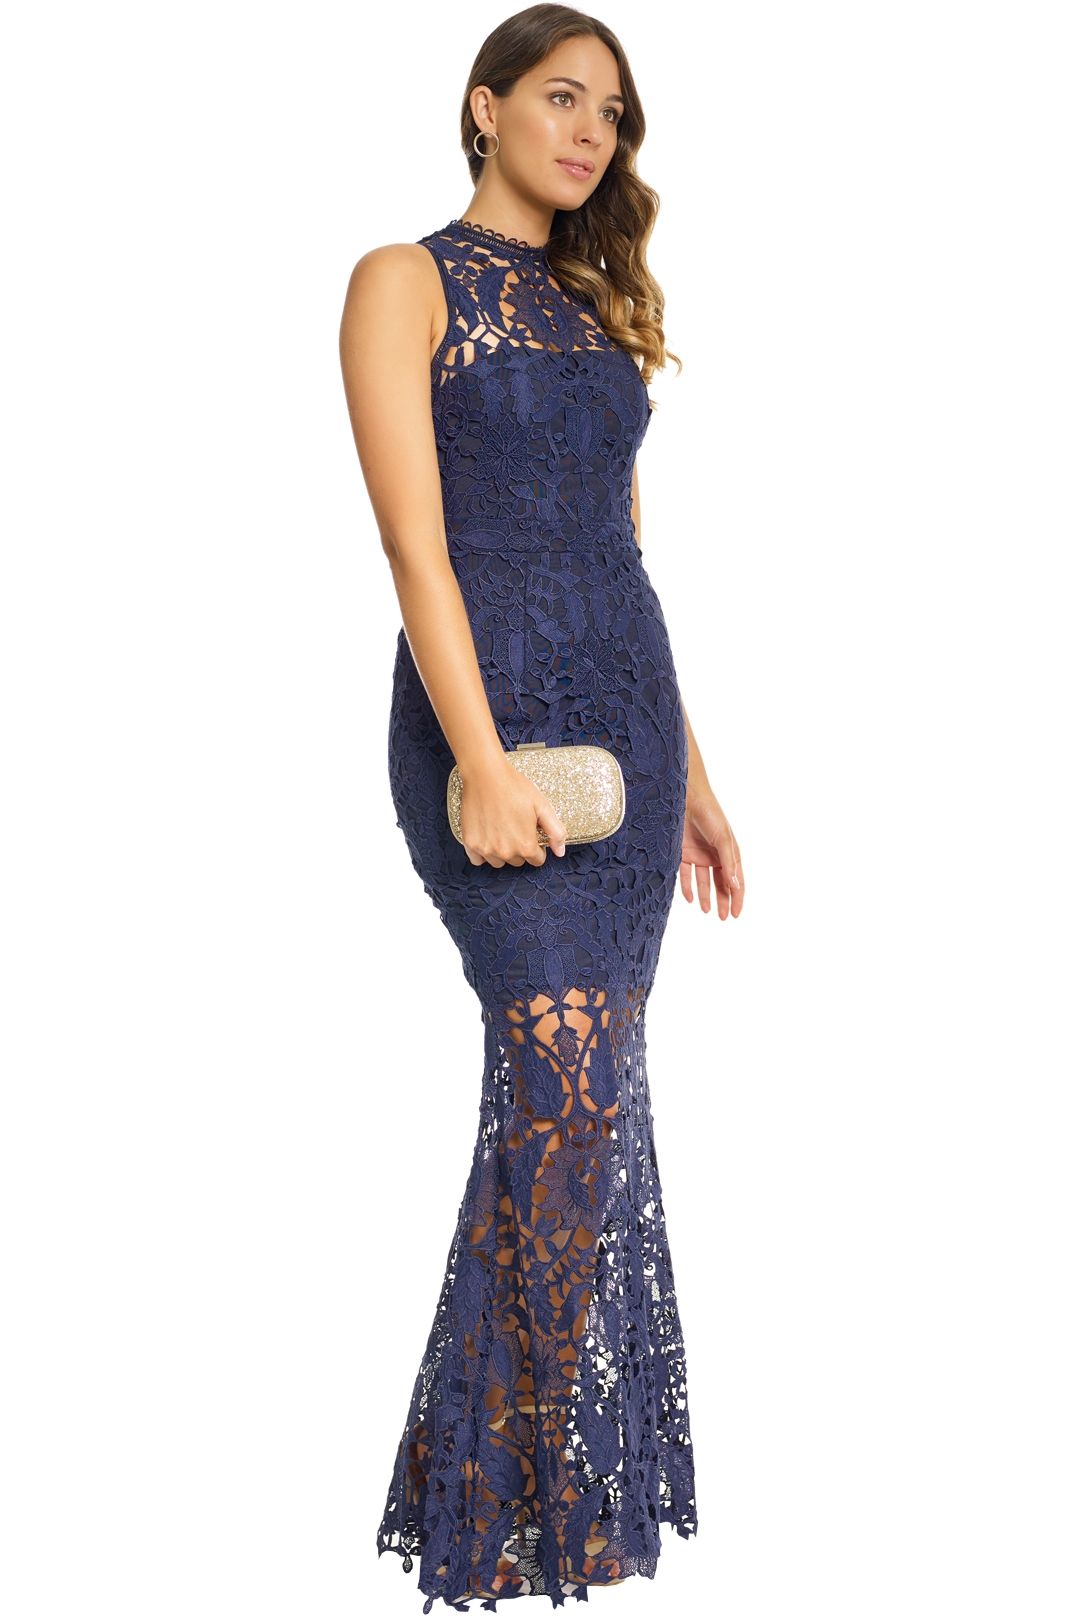 Grace and Hart - Prosecco Gown - Navy - Side